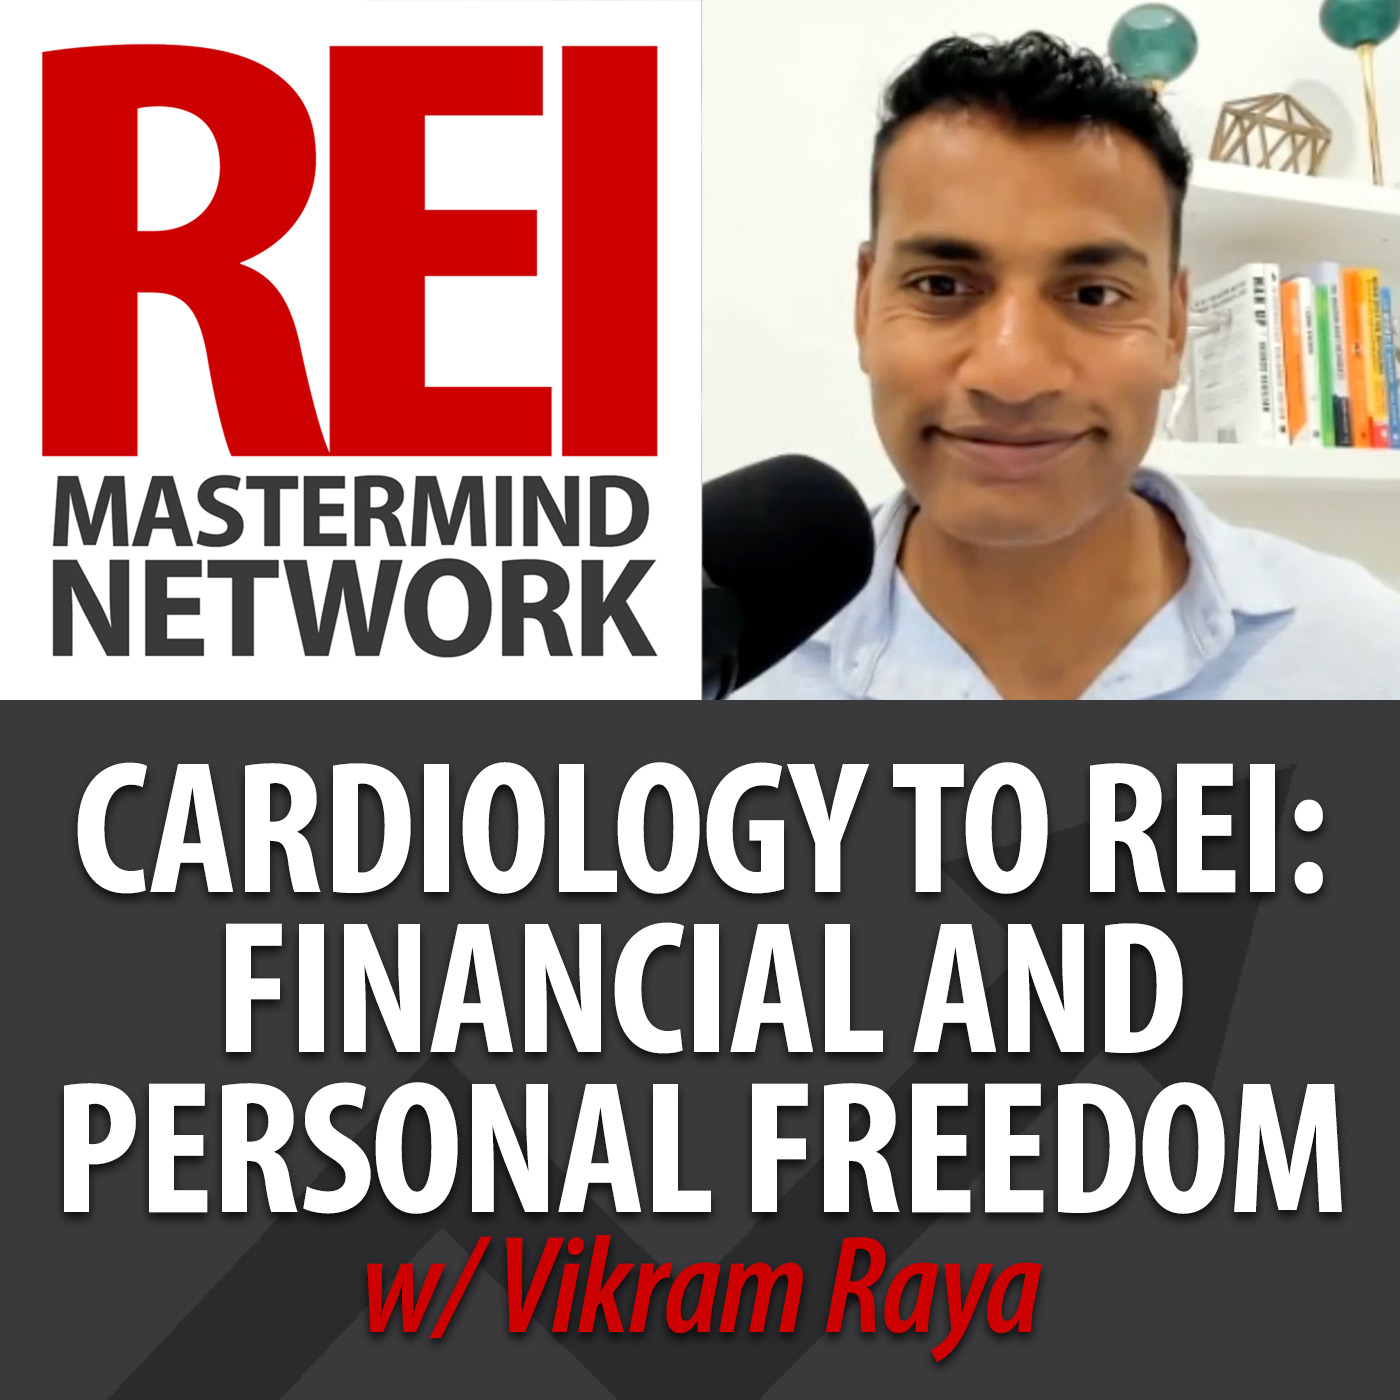 From Cardiology to Real Estate: A Journey to Financial and Personal Freedom with Vikram Raya